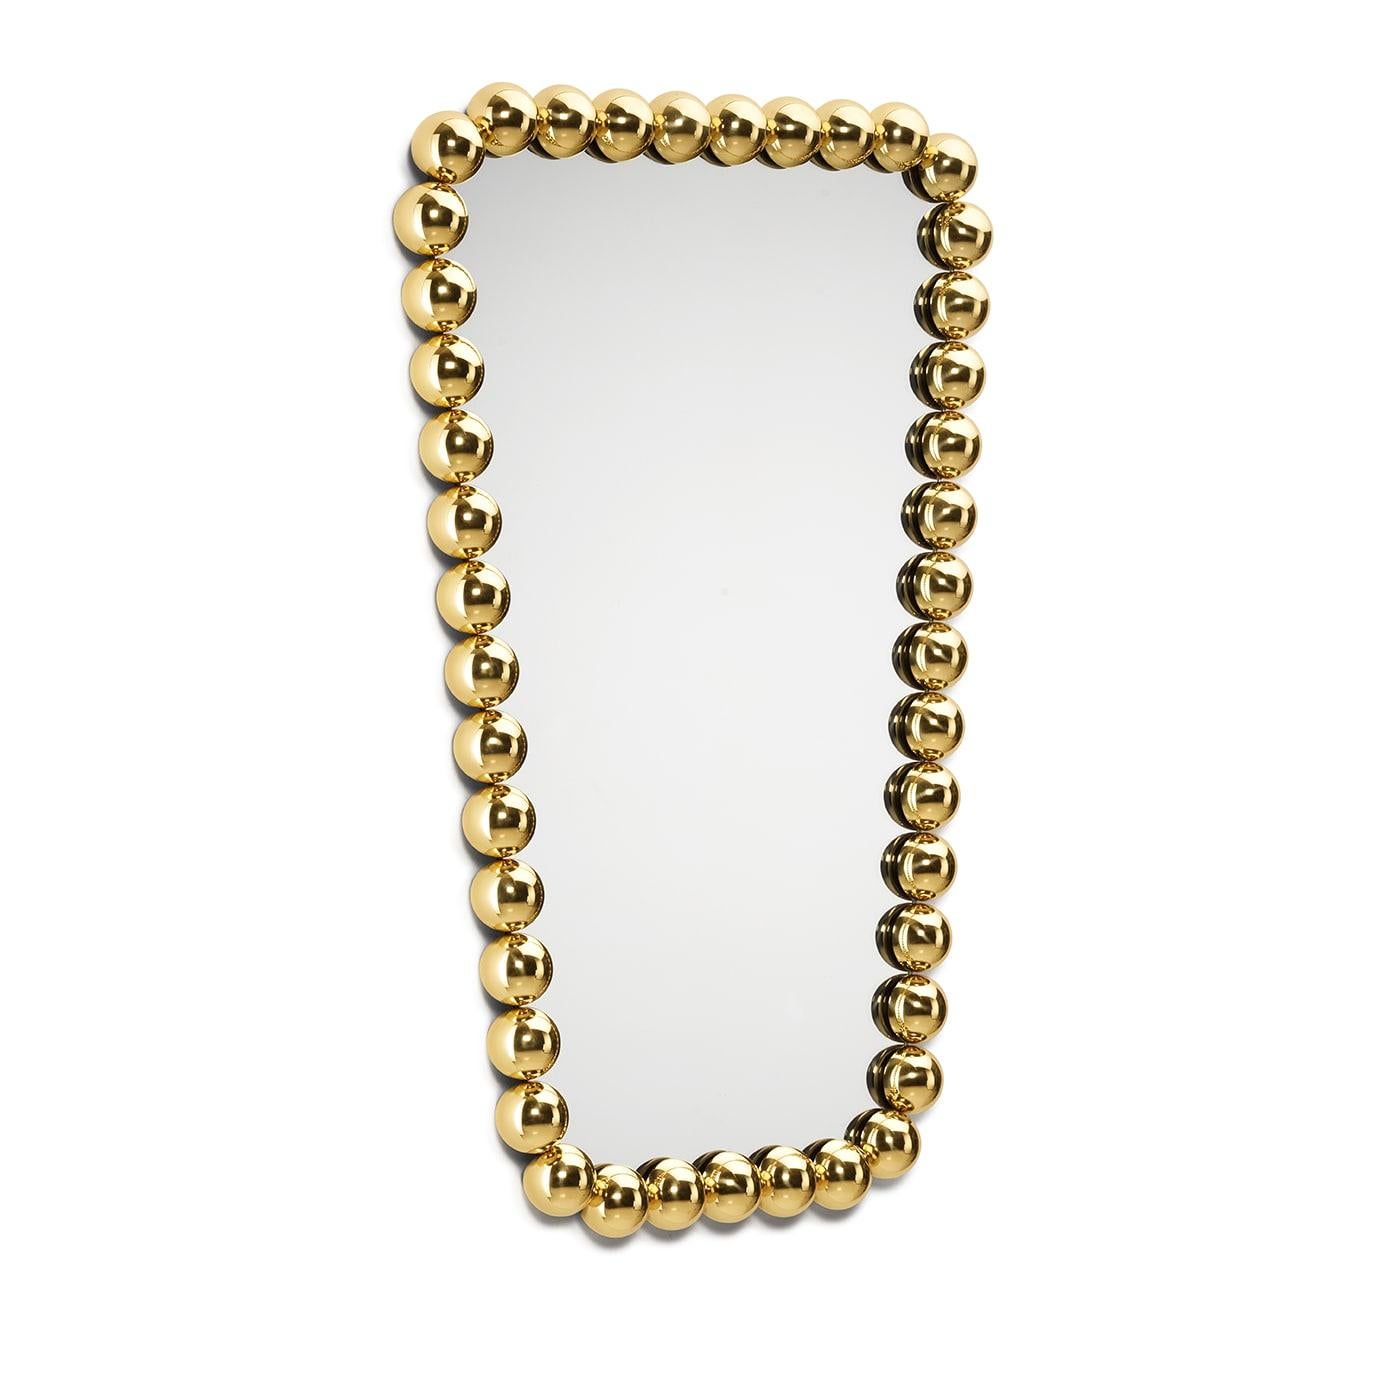 Precious and refined bracelets come to mind when admiring the stylish design of this mirror. Standing out for its luminous frame of brass beads brightened up by a glaring golden finish, it also reveals a subtle geometric inspiration through the